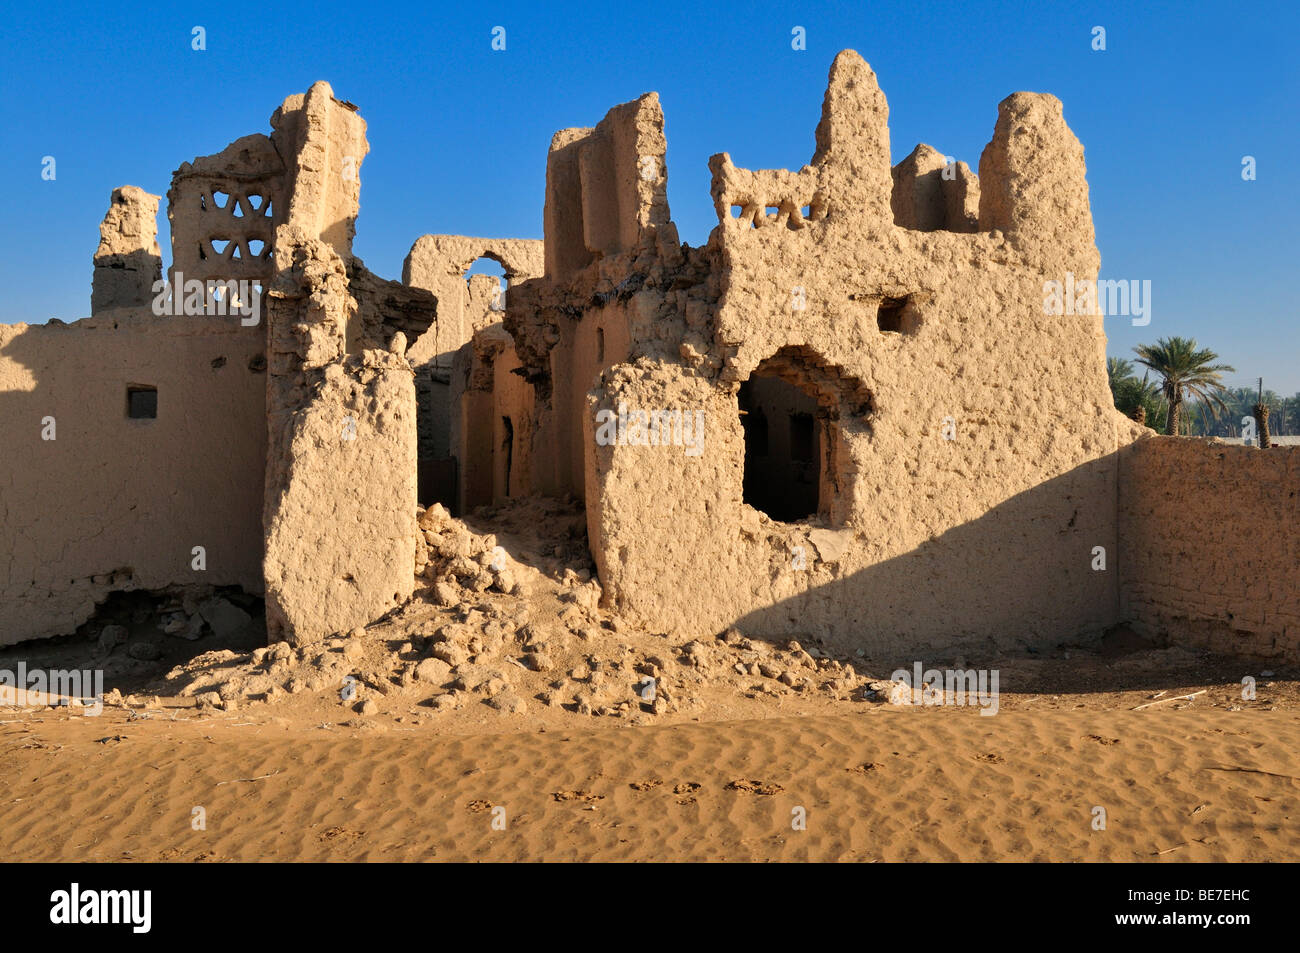 Historic adobe ruins of the old town of Buraimi, Al Dhahirah region, Sultanate of Oman, Arabia, Middle East Stock Photo